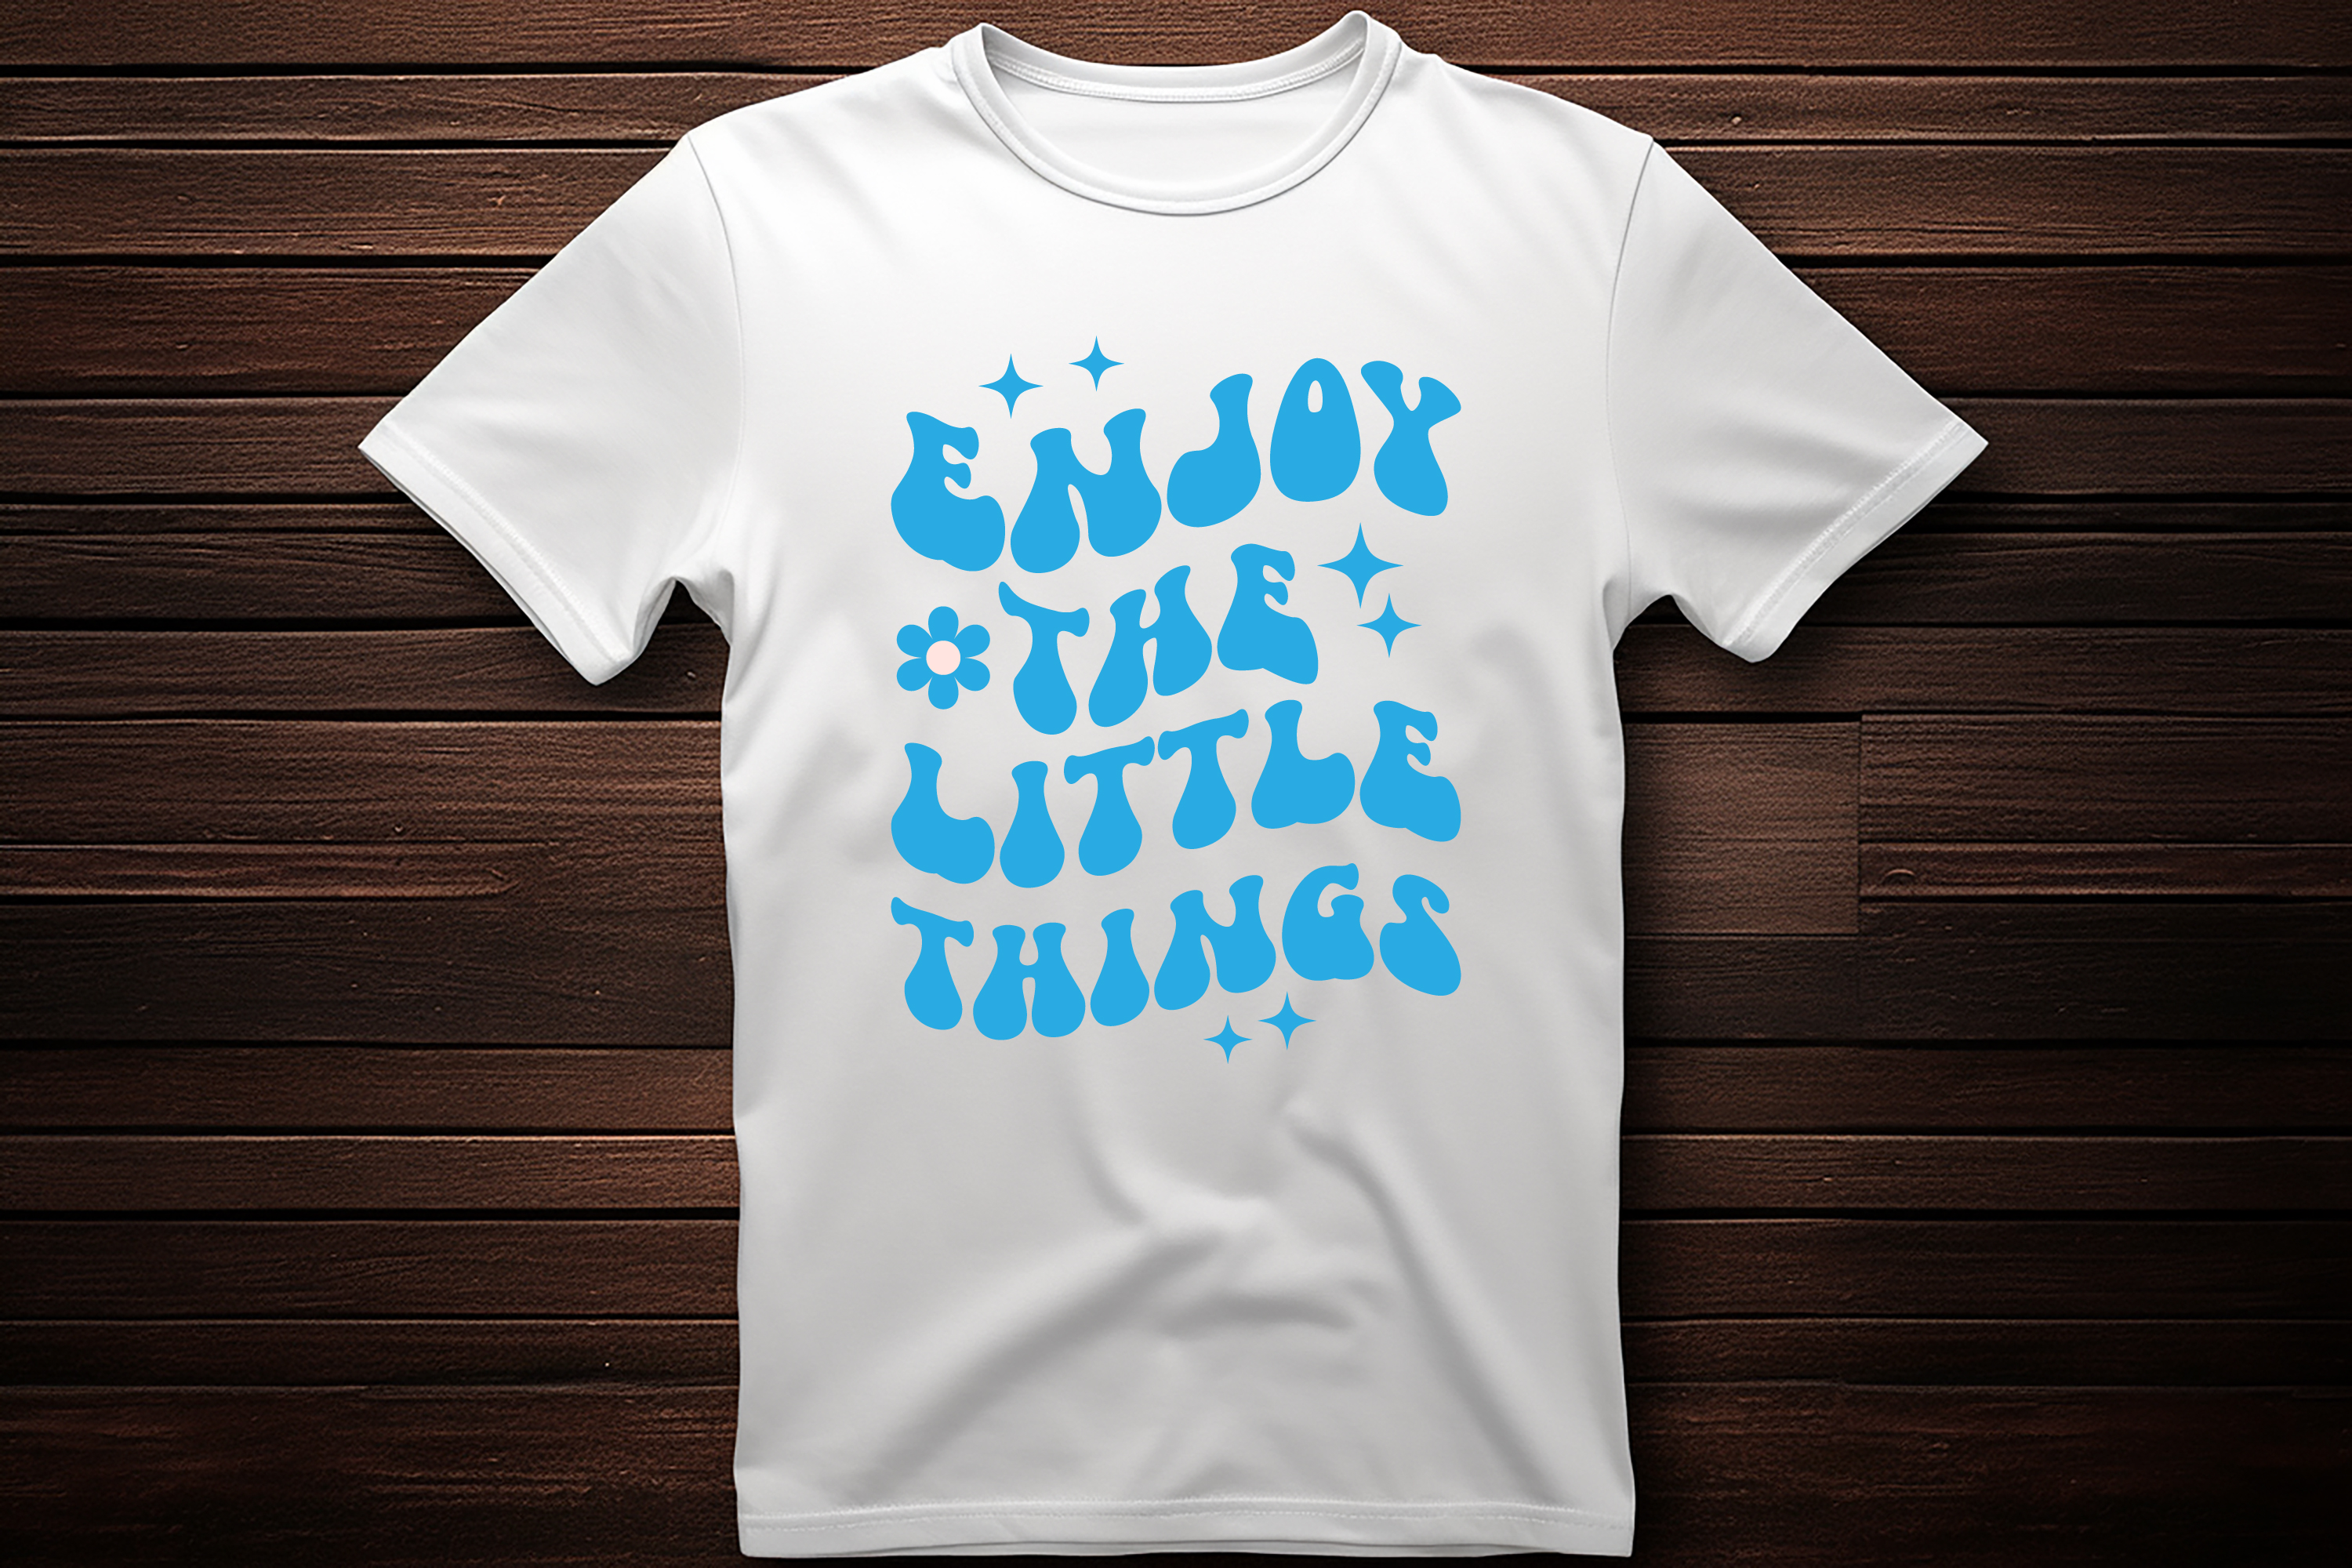 enjoy the little things t shirt design template,t shirt design maker,custom t  shirt,custom t shirt design,apparel, art, clothes, california, holiday,  distressed, graphic, grunge, illustration, print, retro, shirt, t shirt, t,  surf, textile, vector, fabric, message - Buy t-shirt designs